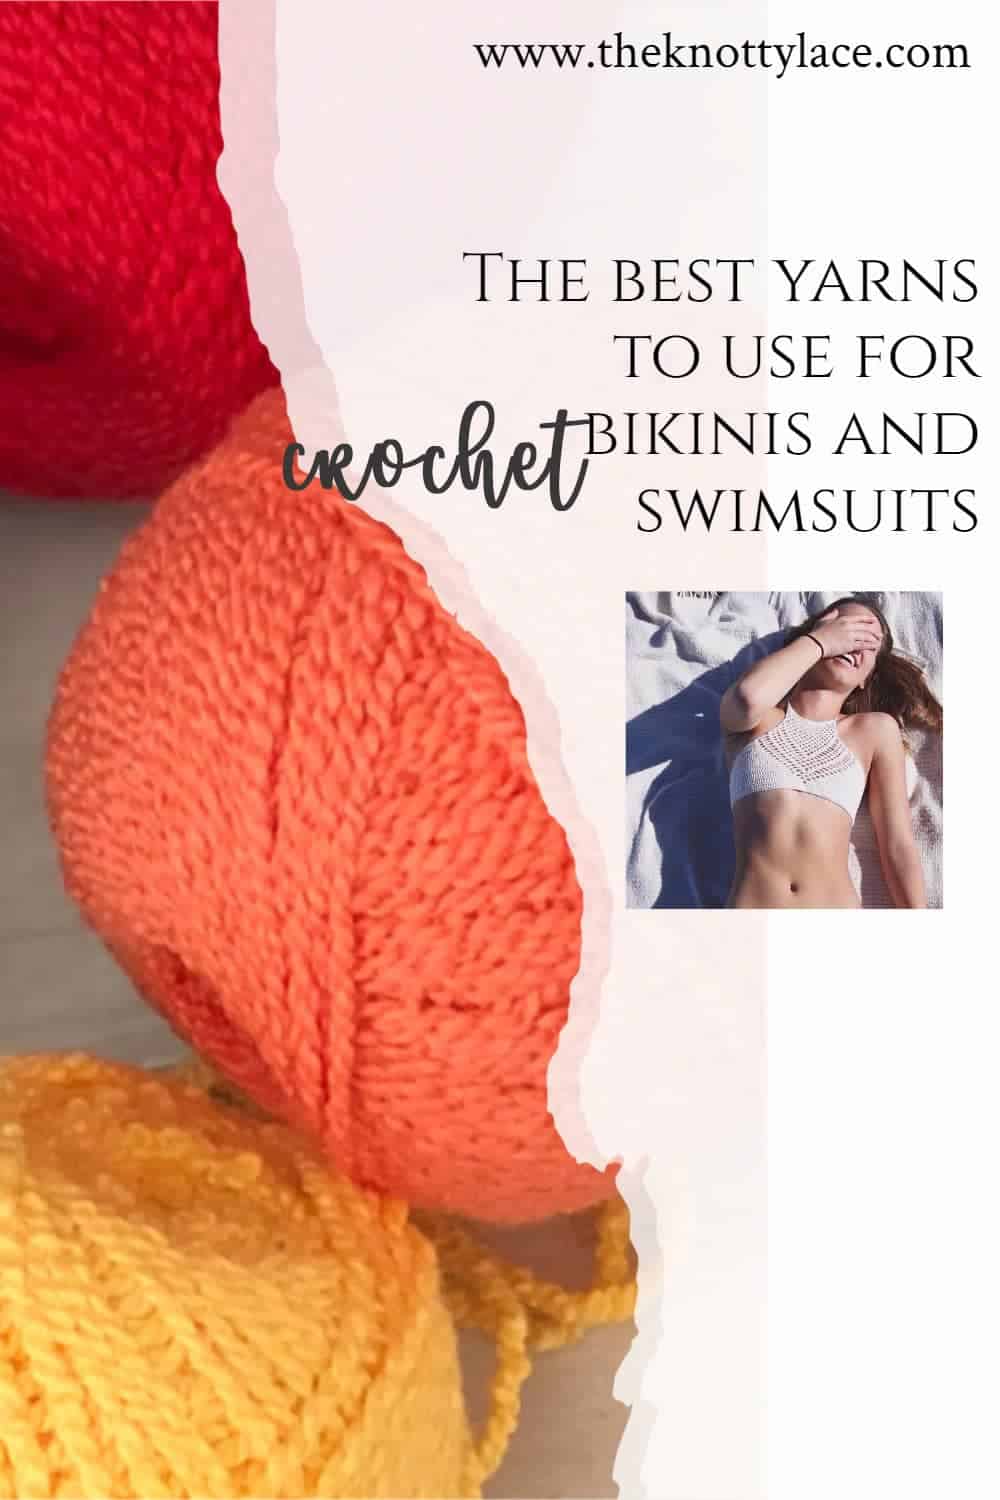 The-best-yarns-to-use-for-crochet-bikinis-and-swimsuits